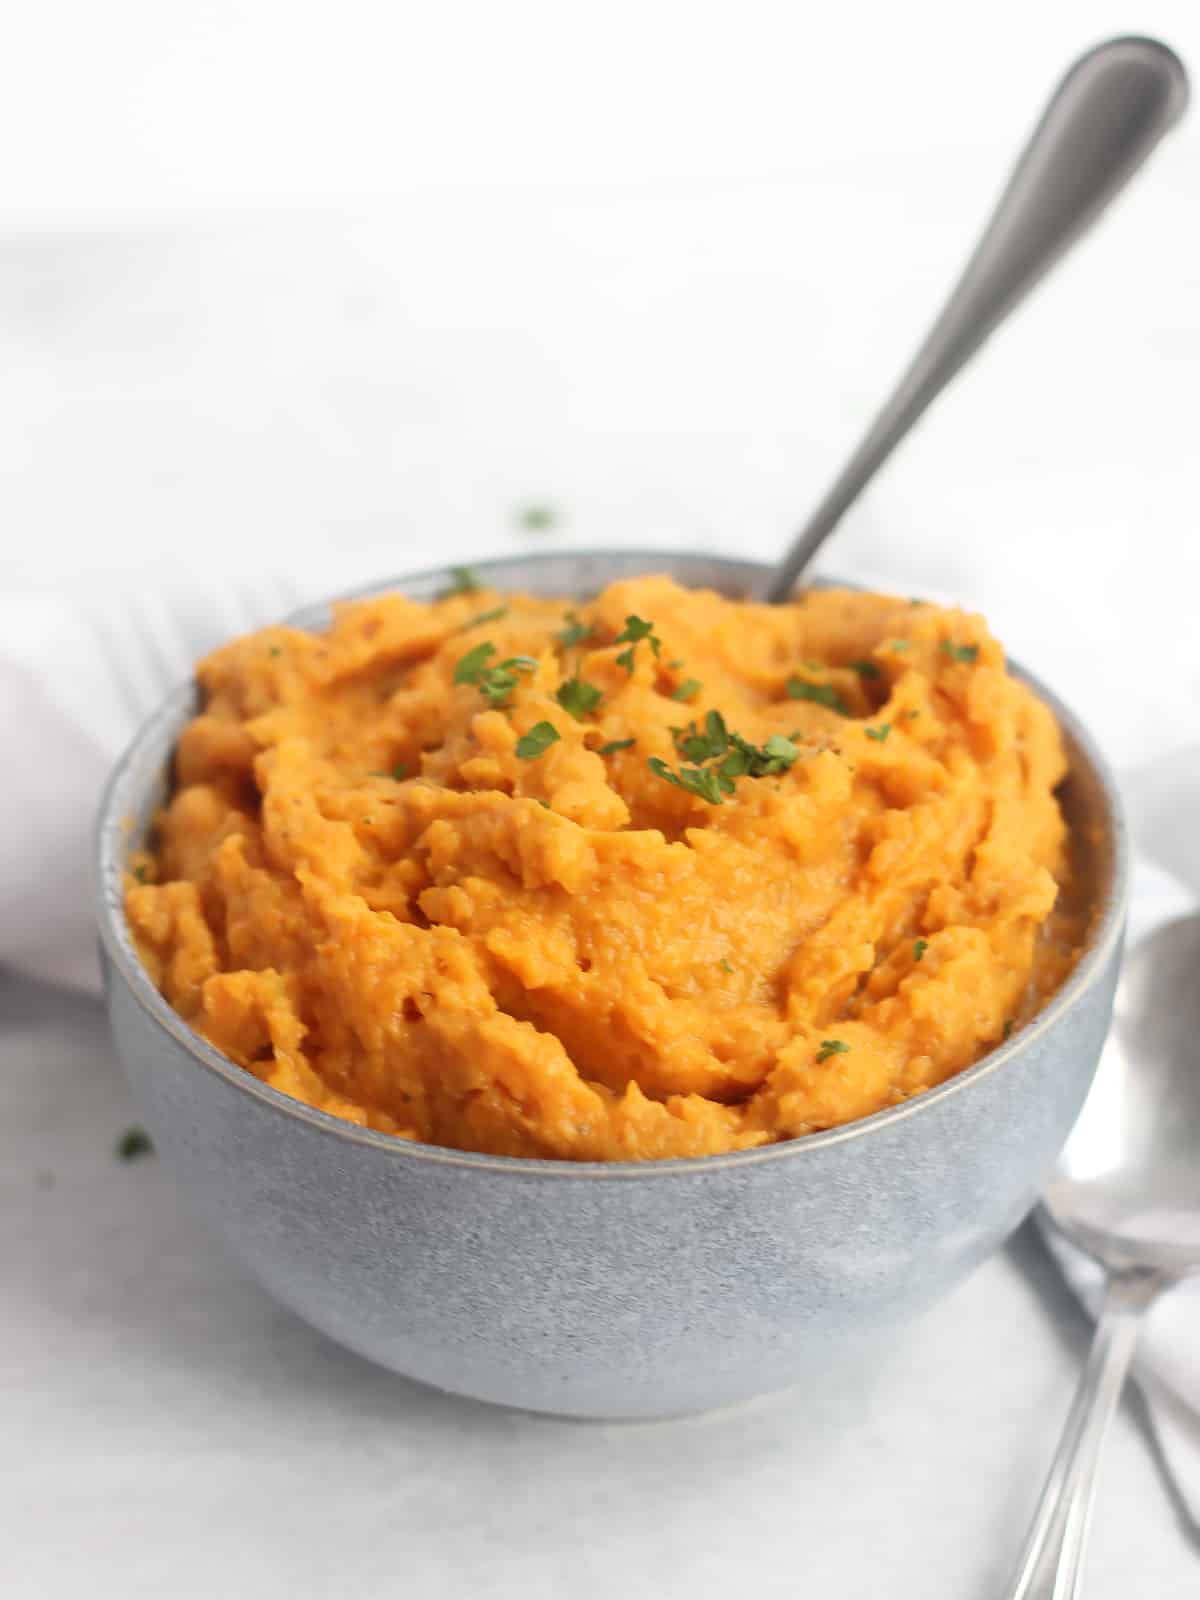 Swhipped sweet potatoes in a bowl with a spoon.